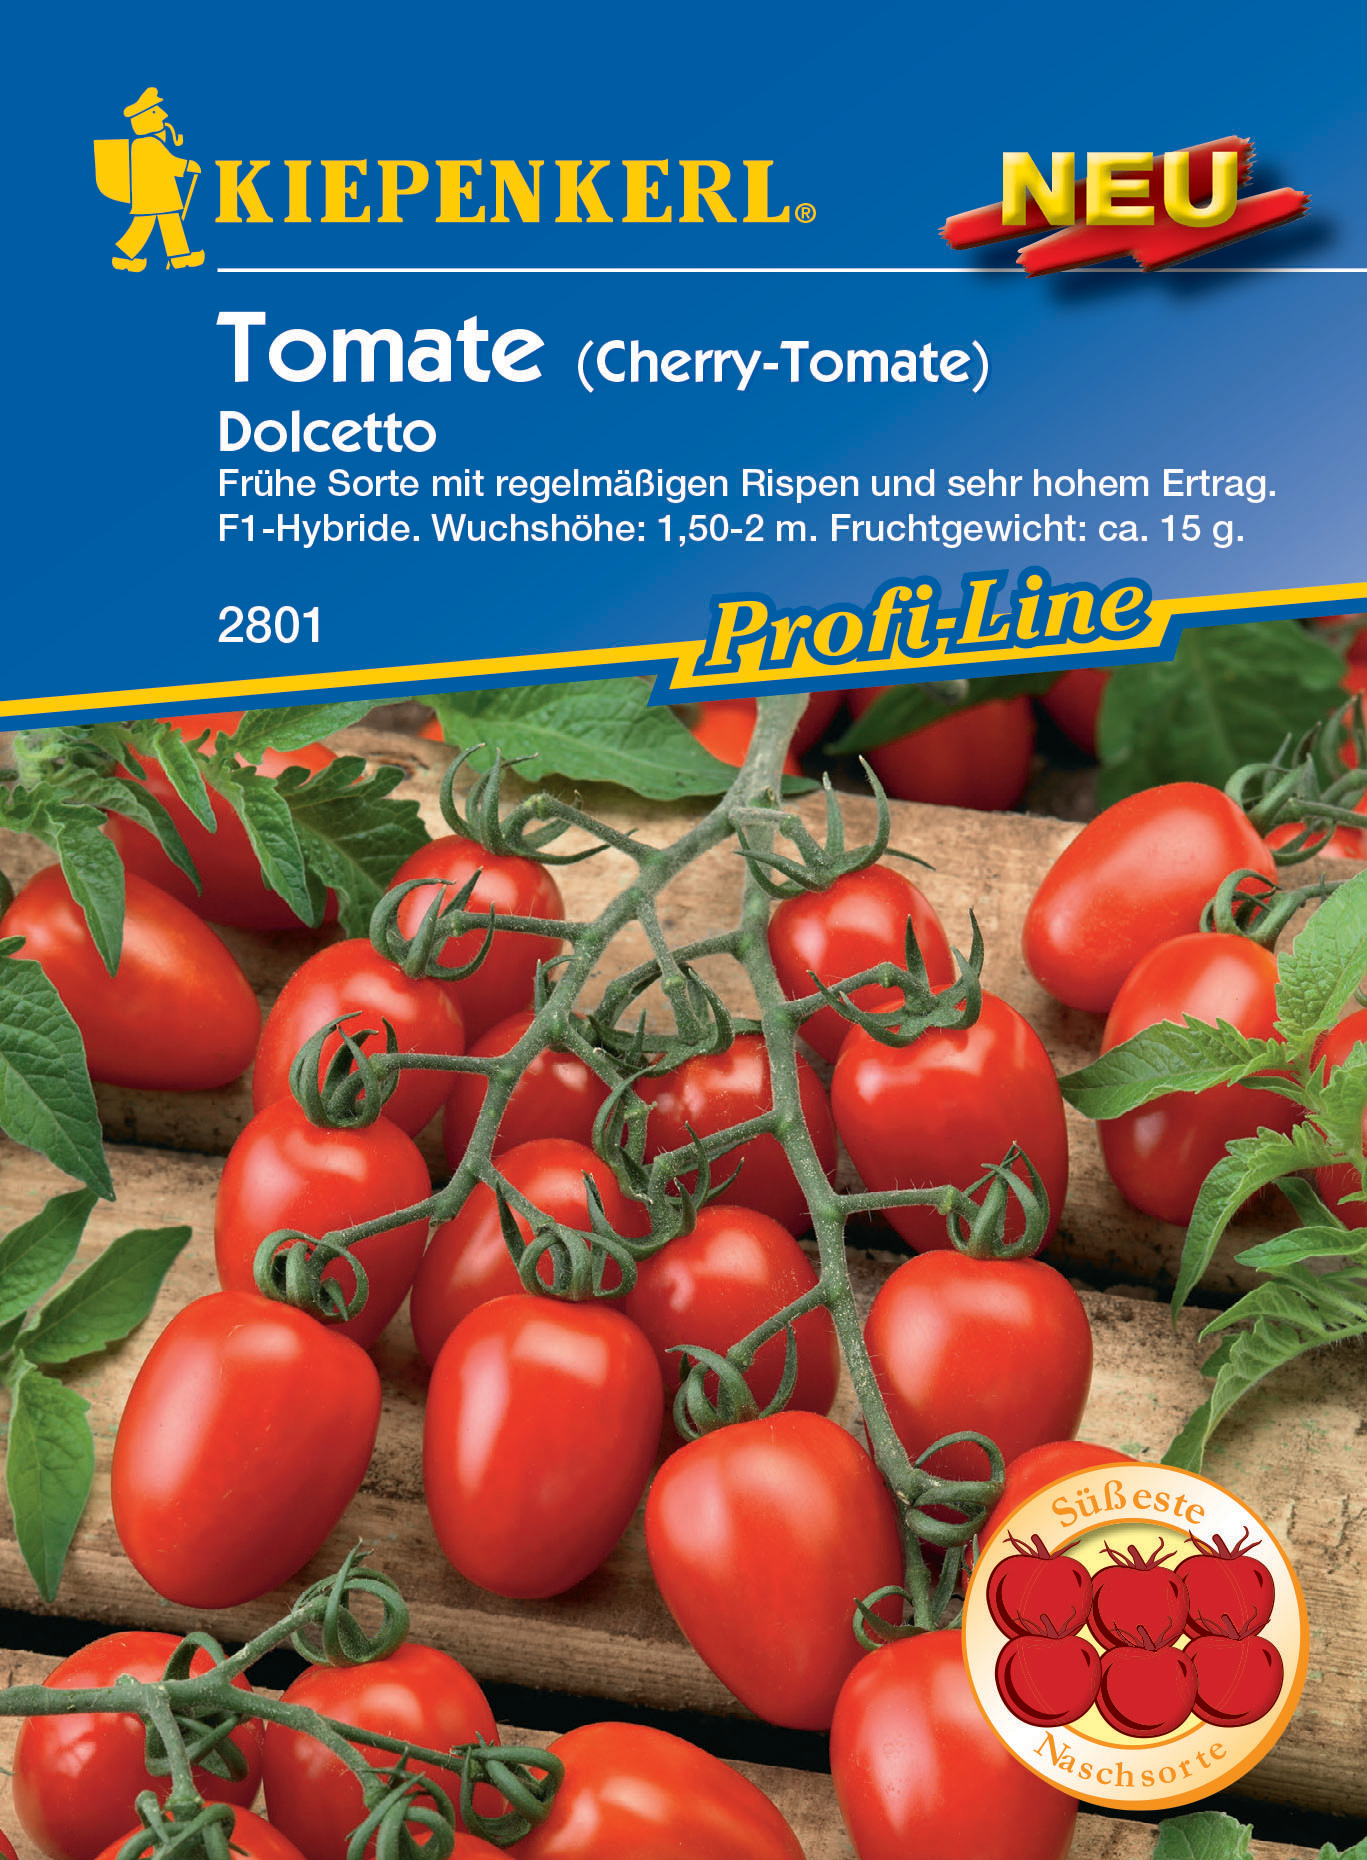 Cherry-Tomate Dolcetto, F1